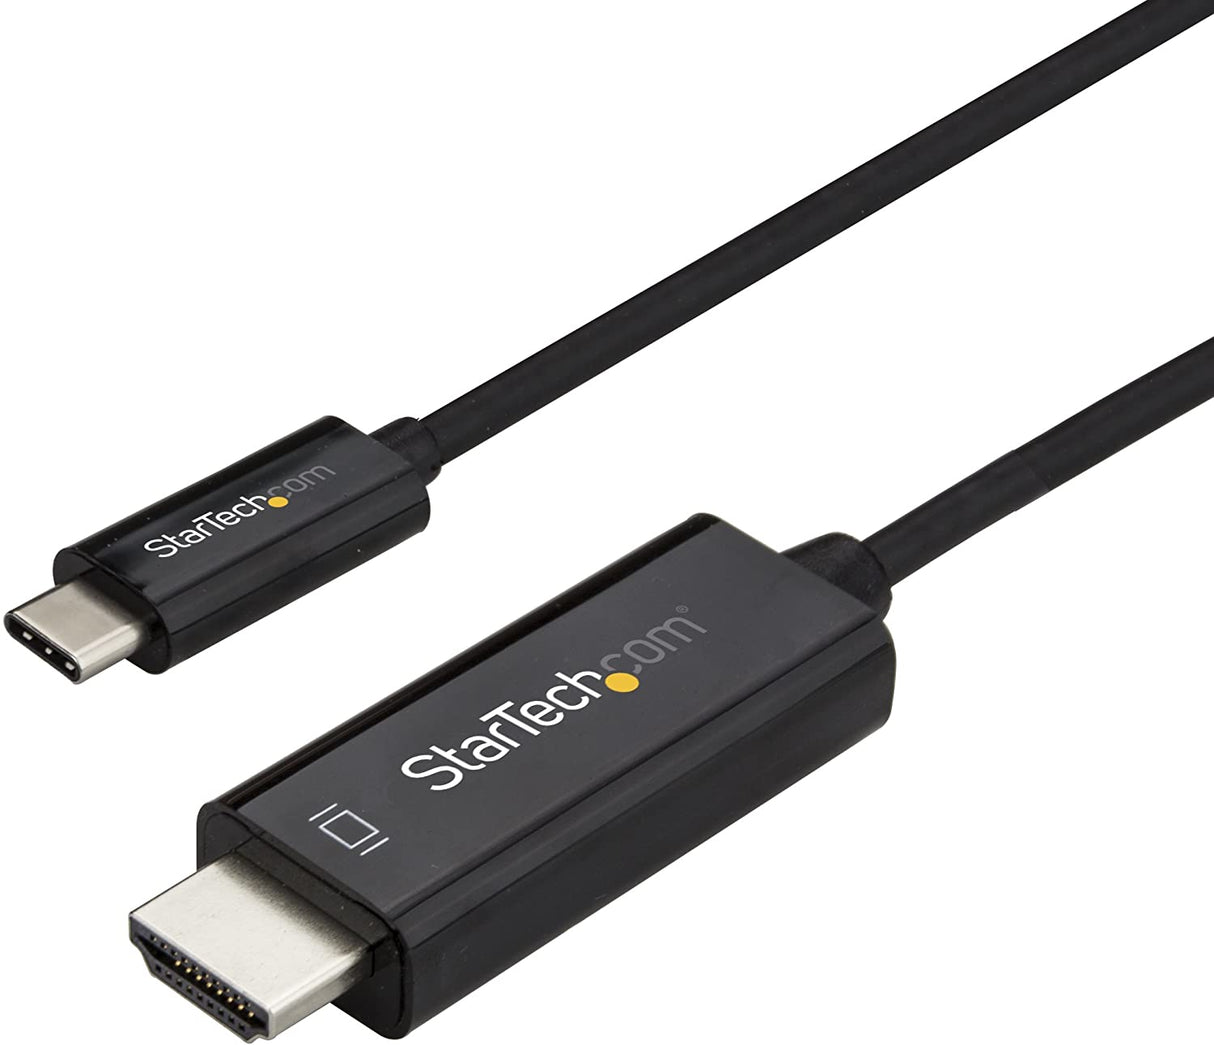 StarTech.com 10ft (3m) USB C to HDMI Cable - 4K 60Hz USB Type C to HDMI 2.0 Video Adapter Cable - Thunderbolt 3 Compatible - Laptop to HDMI Monitor/Display - DP 1.2 Alt Mode HBR2 - Black (CDP2HD3MBNL) 10 ft / 3 m Black